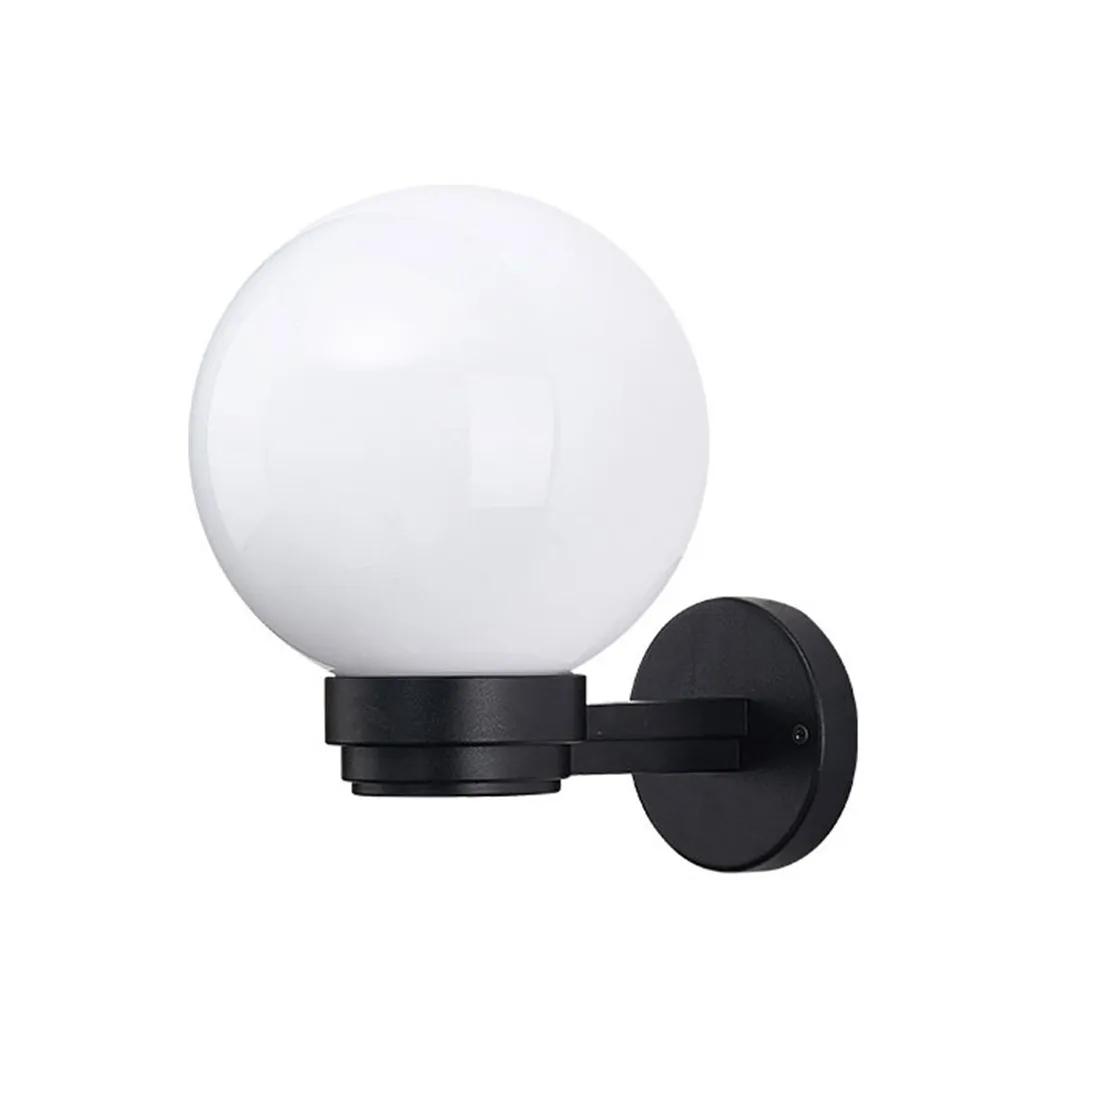 Indoor Outdoor Wall Light with White or Clear Acrylic Globe Shade for Entryway Porch Patio Exterior E27 Base Socket Wall Lantern weekly planner board wall calendar dry erase clear acrylic white magnetic whiteboard for fridge note